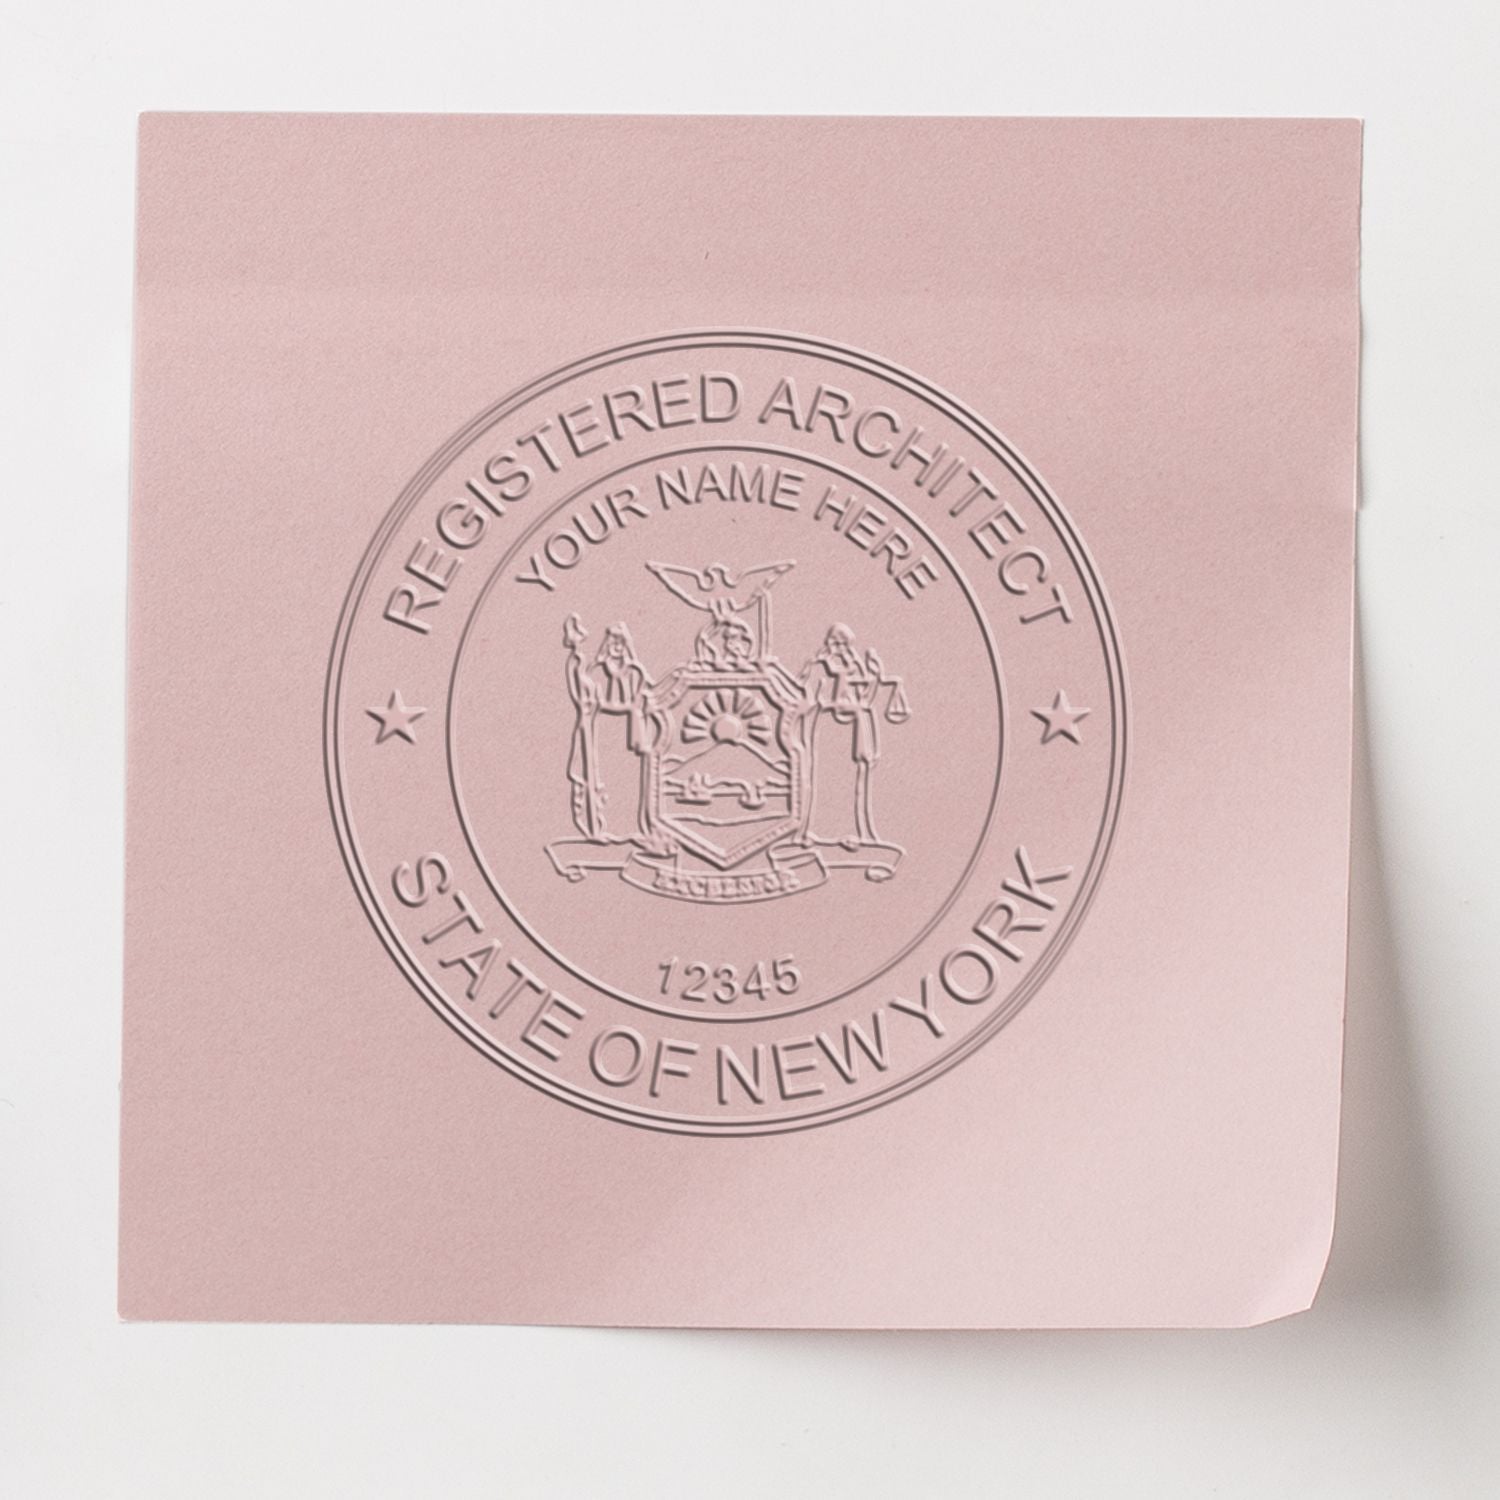 New York Architecture Seal Stamp